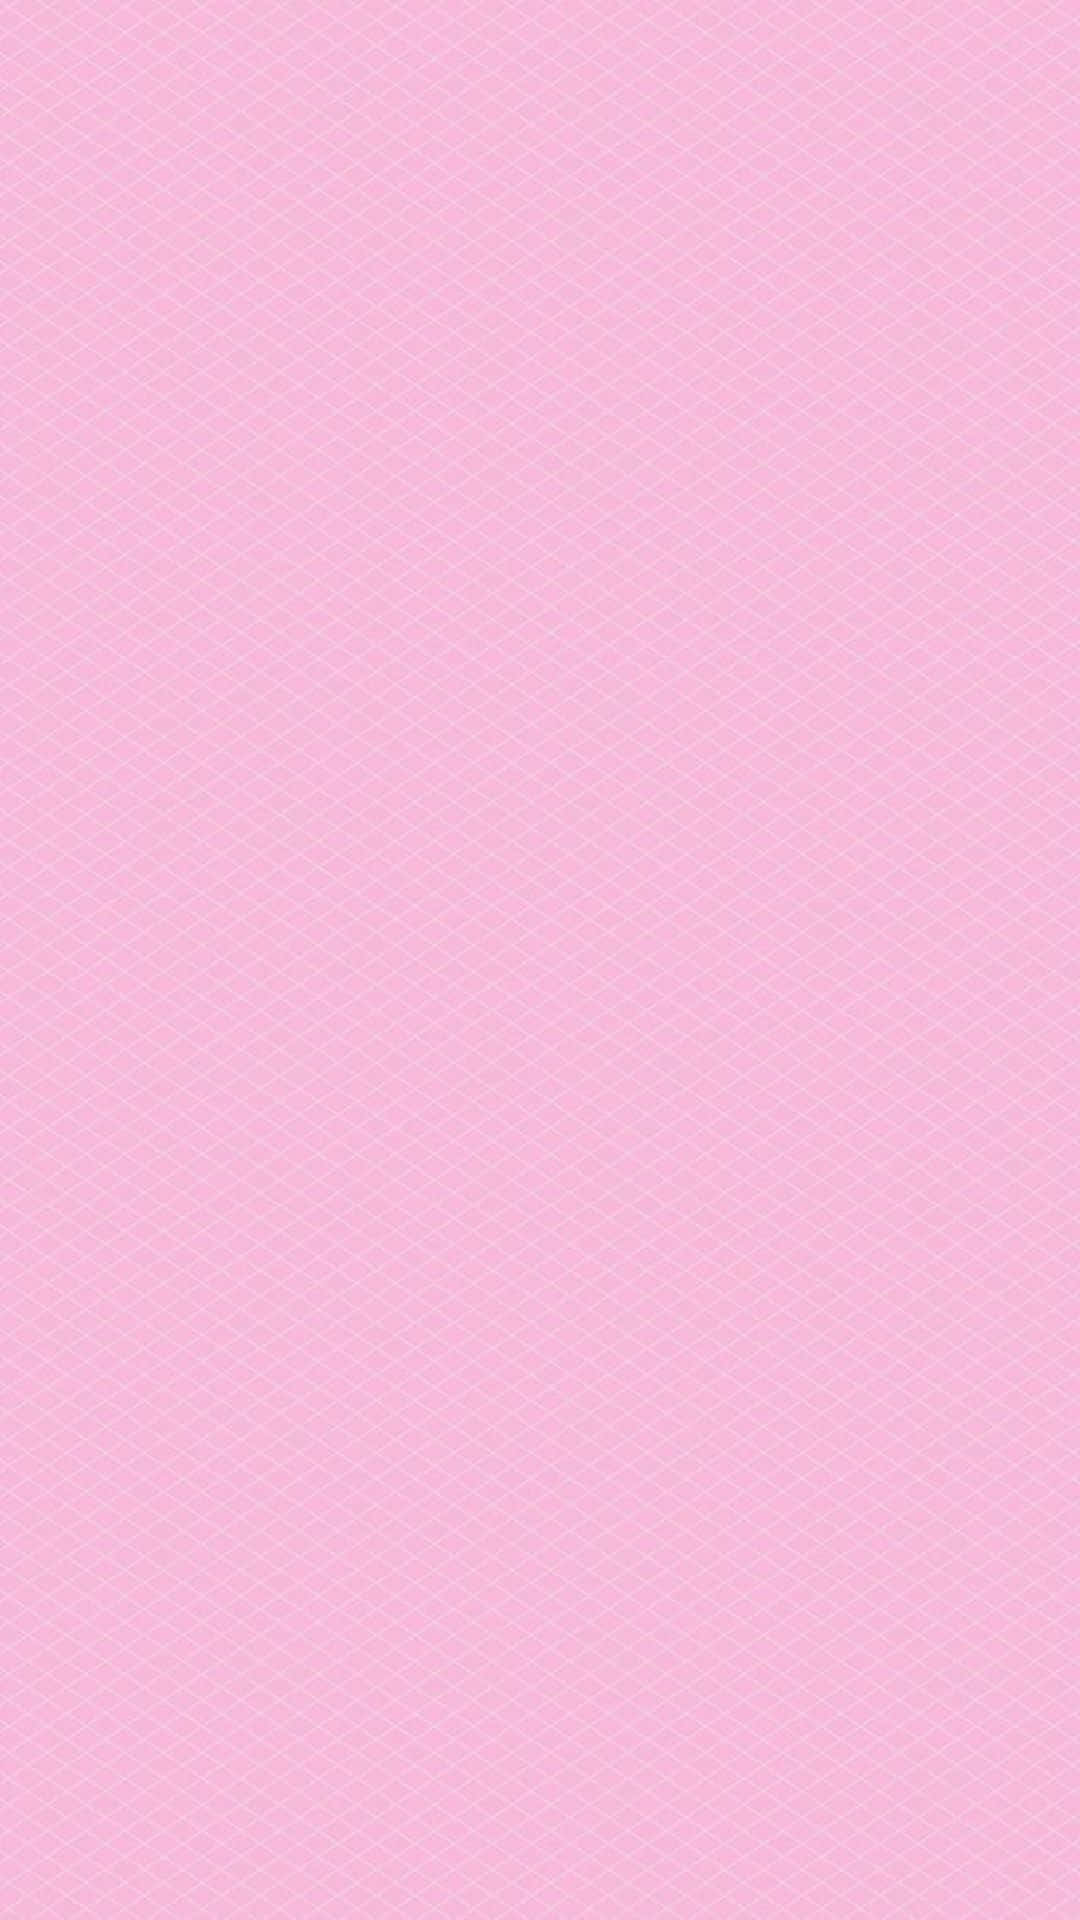 Free Pink Solid Color Wallpaper Downloads, [100+] Pink Solid Color  Wallpapers for FREE 